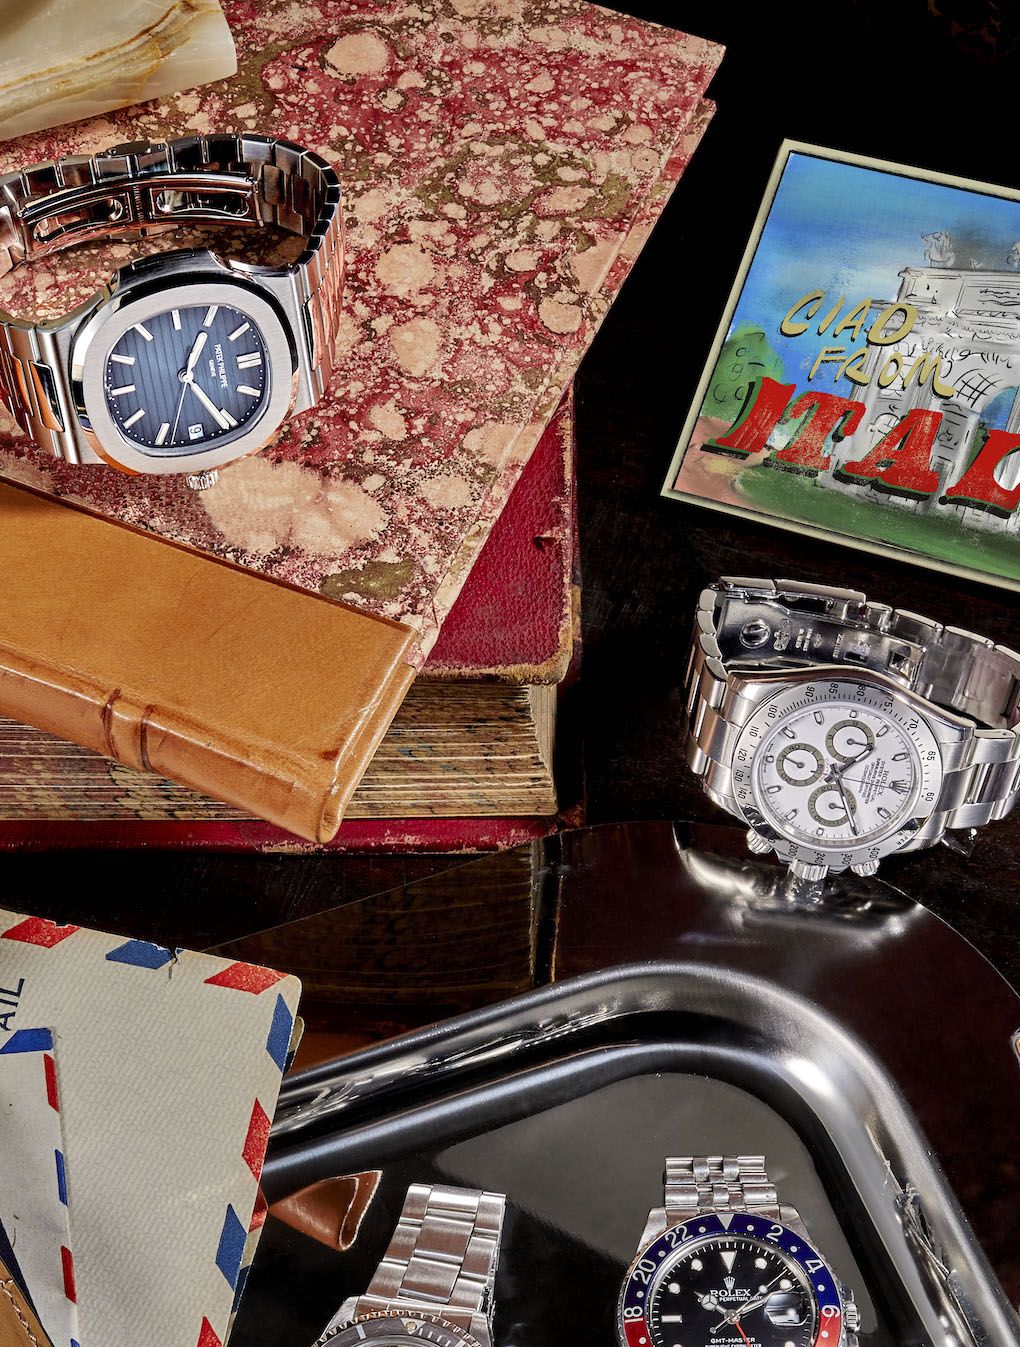 wristwatches, timepieces the patek philippe nautilus, rolex cosmograph daytona, and rolex sea dweller shown here will be on view at the new york watch auction at phillips on june 9 patek philippe nautilus 5711 1a circa 2021, rolex cosmograph daytona 116520 circa 2003, and rolex sea dweller 1665 double red with mark ii dial circa 1967, prices upon request phillipscom private collector’s rolex gmt master i 16750 circa 1987, courtesy of phillips pilot’s watch chronograph spitfire, $5,950 iwccom for additional credits, see the sourcebook, page 196